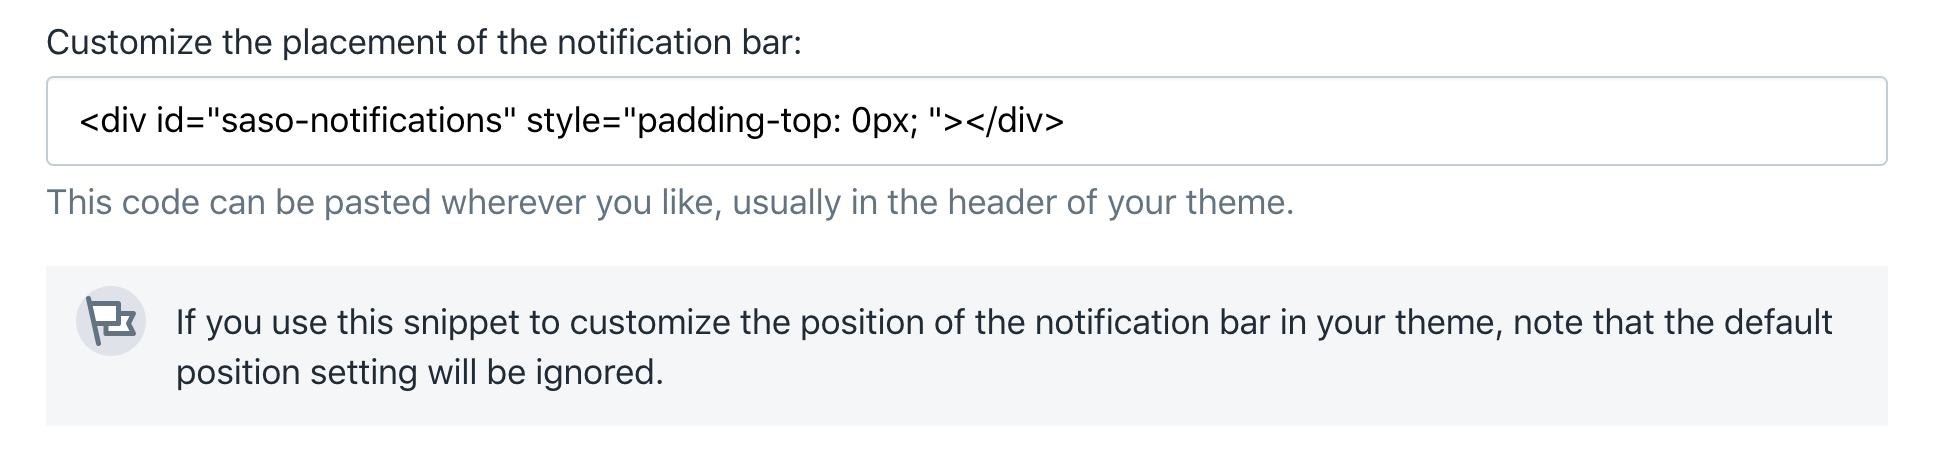 A code snippet that can be used to change the position of an offer's notification bar.